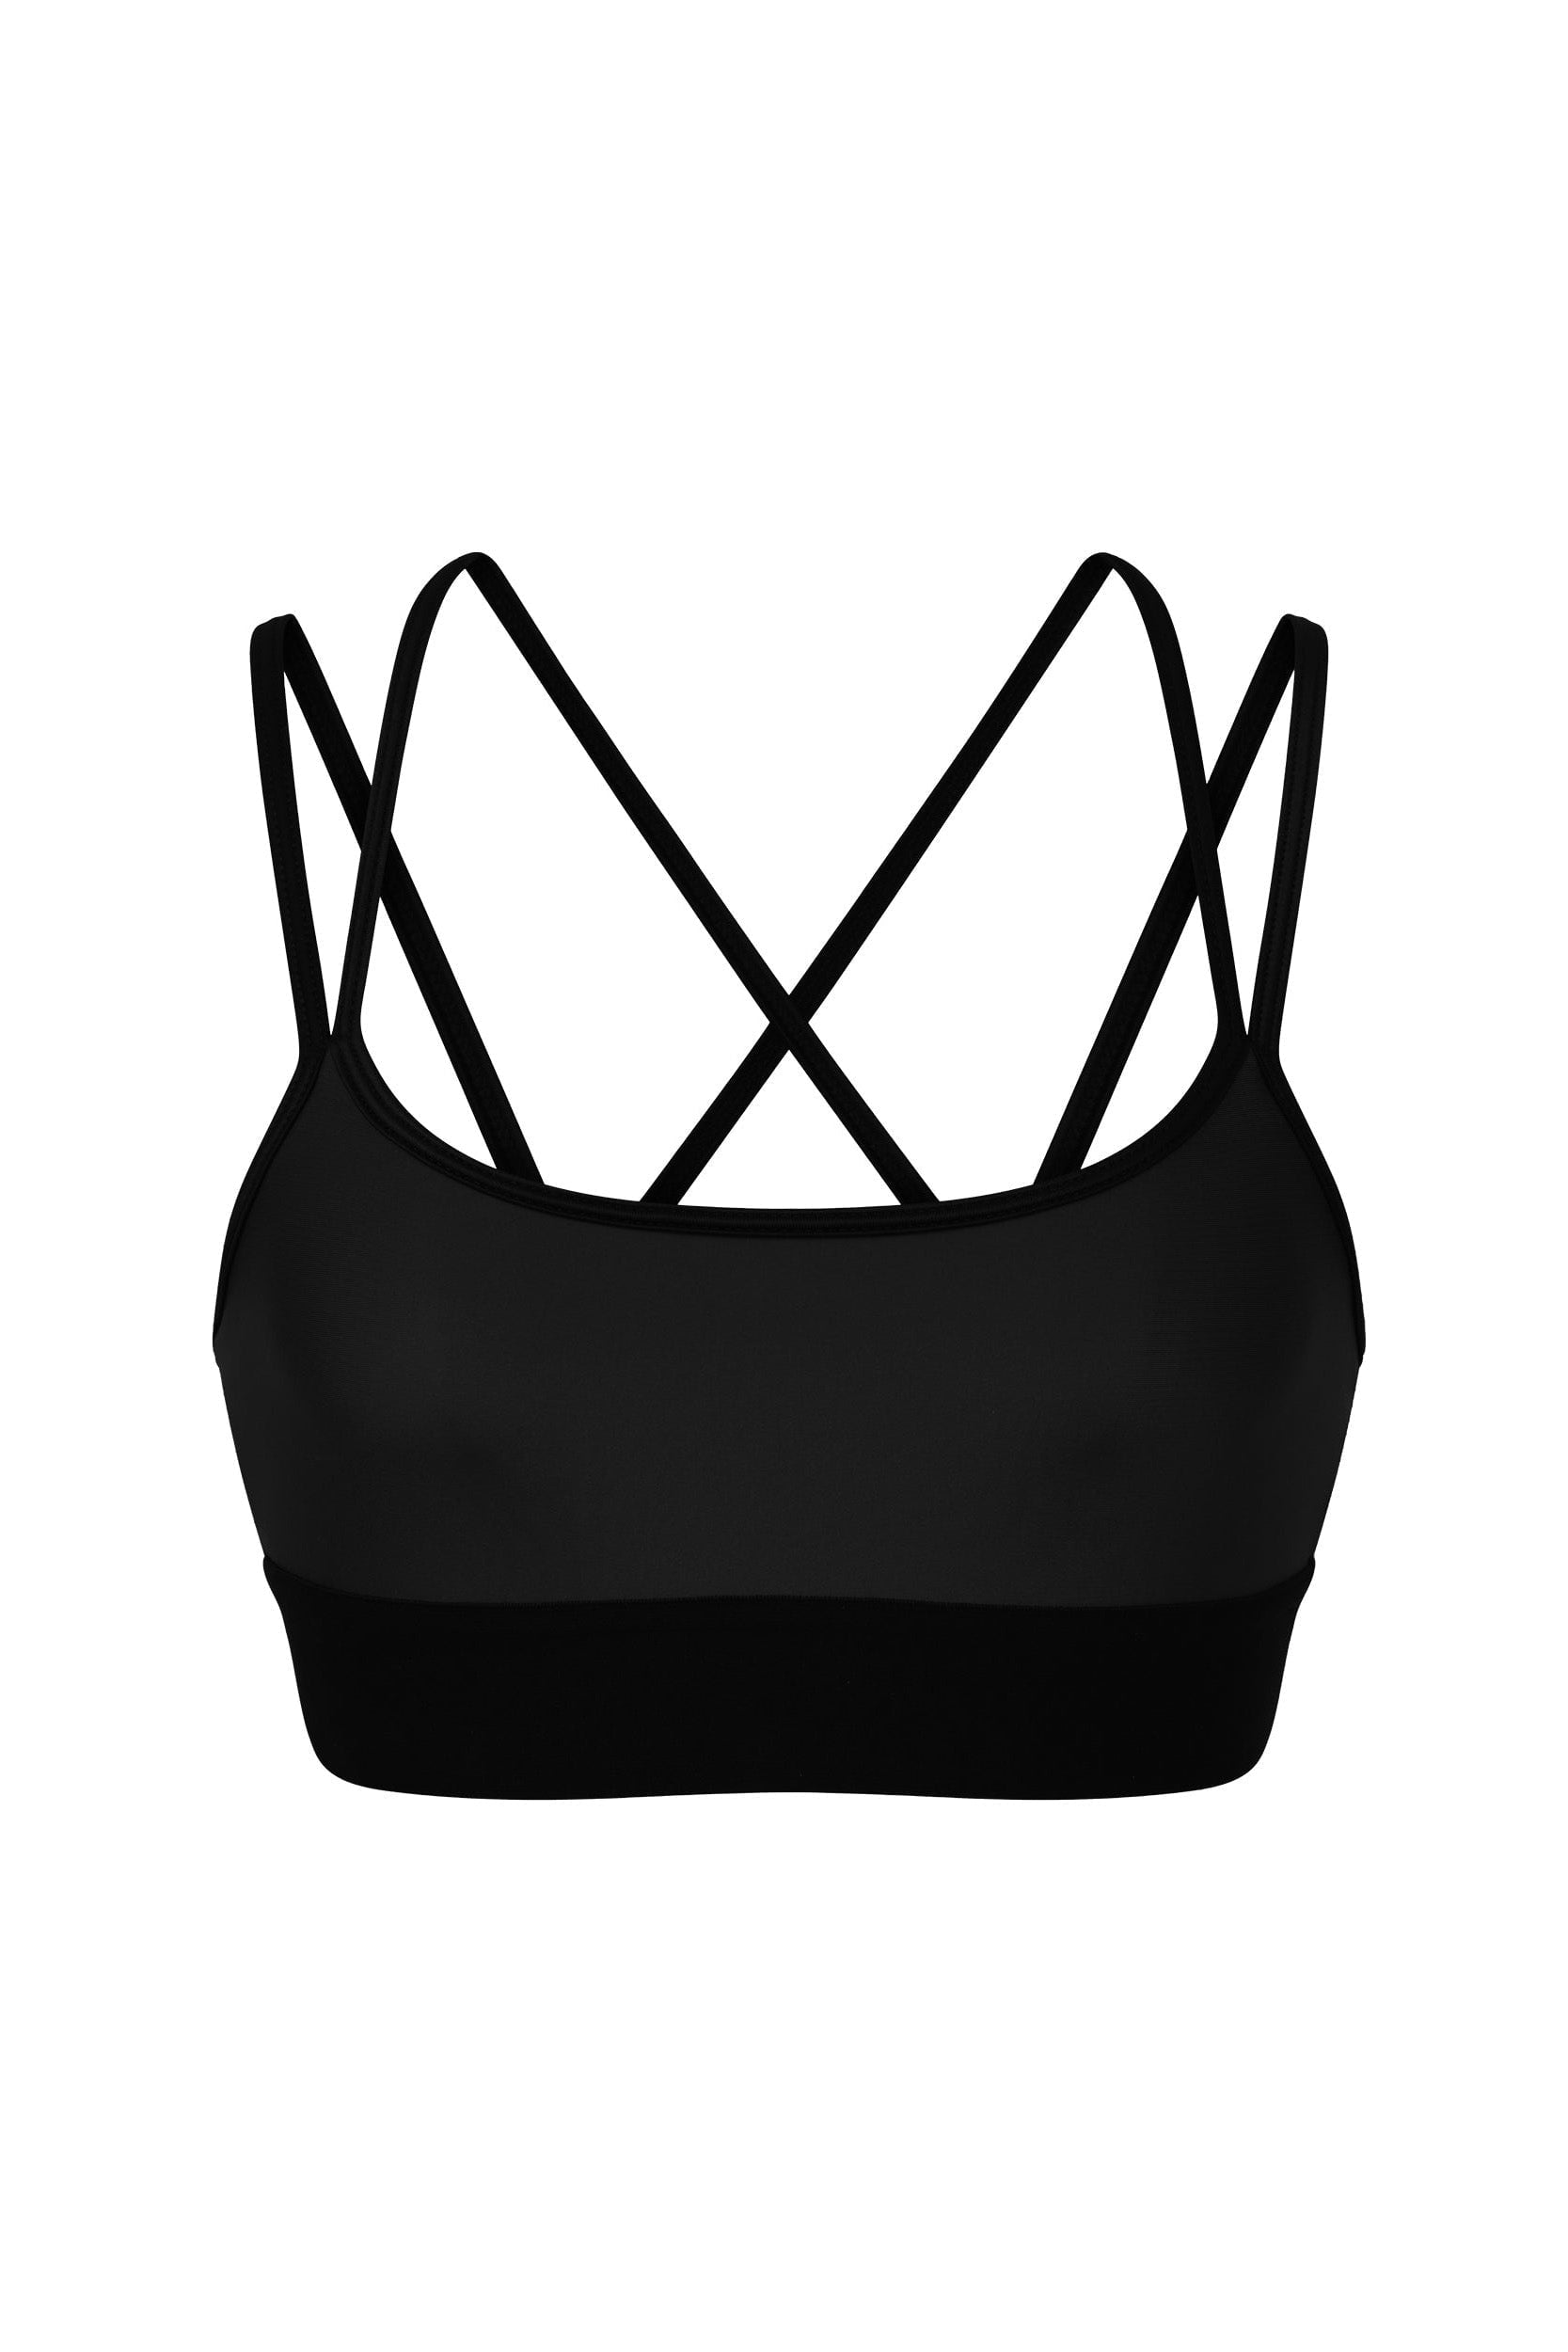 Presenting the Liquid Jolie Bra - Black Gloss: a sleek sports bra distinguished by multiple thin shoulder straps that crisscross at the back, providing exceptional support and comfort. Crafted from 4-way stretch, moisture-wicking fabric, it features a scoop neckline and a wide elastic band at the bottom for an extra secure fit.